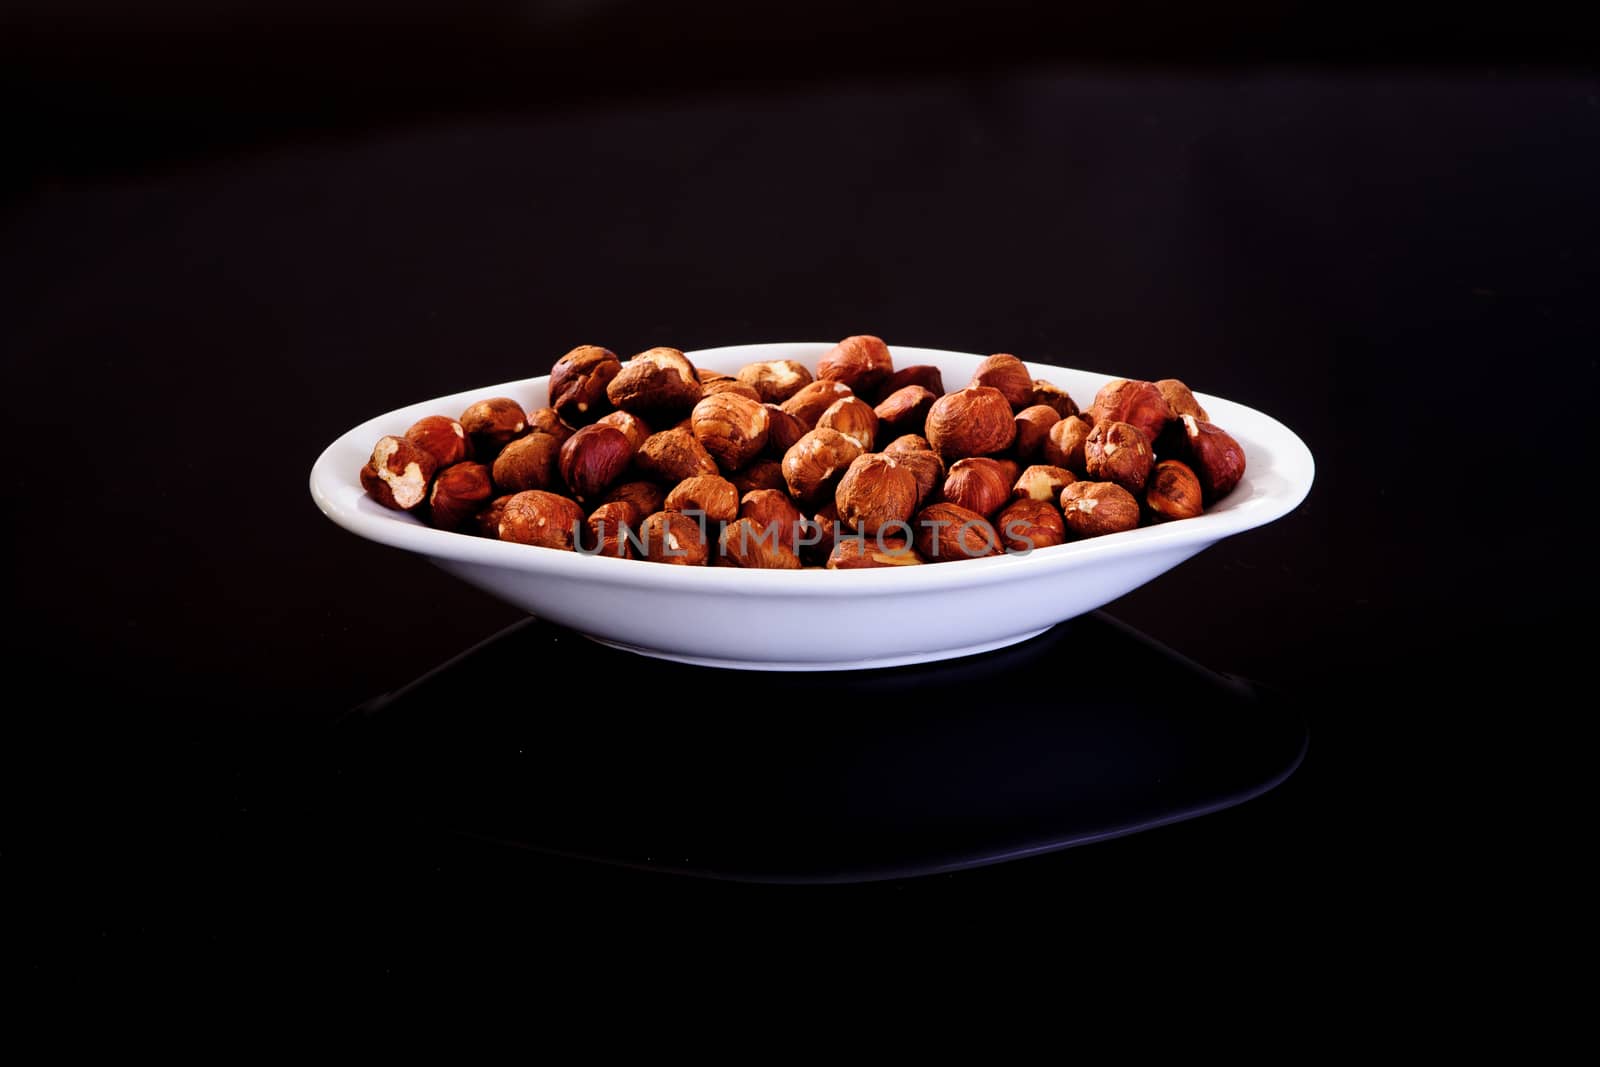 Hazelnuts in a white plate on a black background